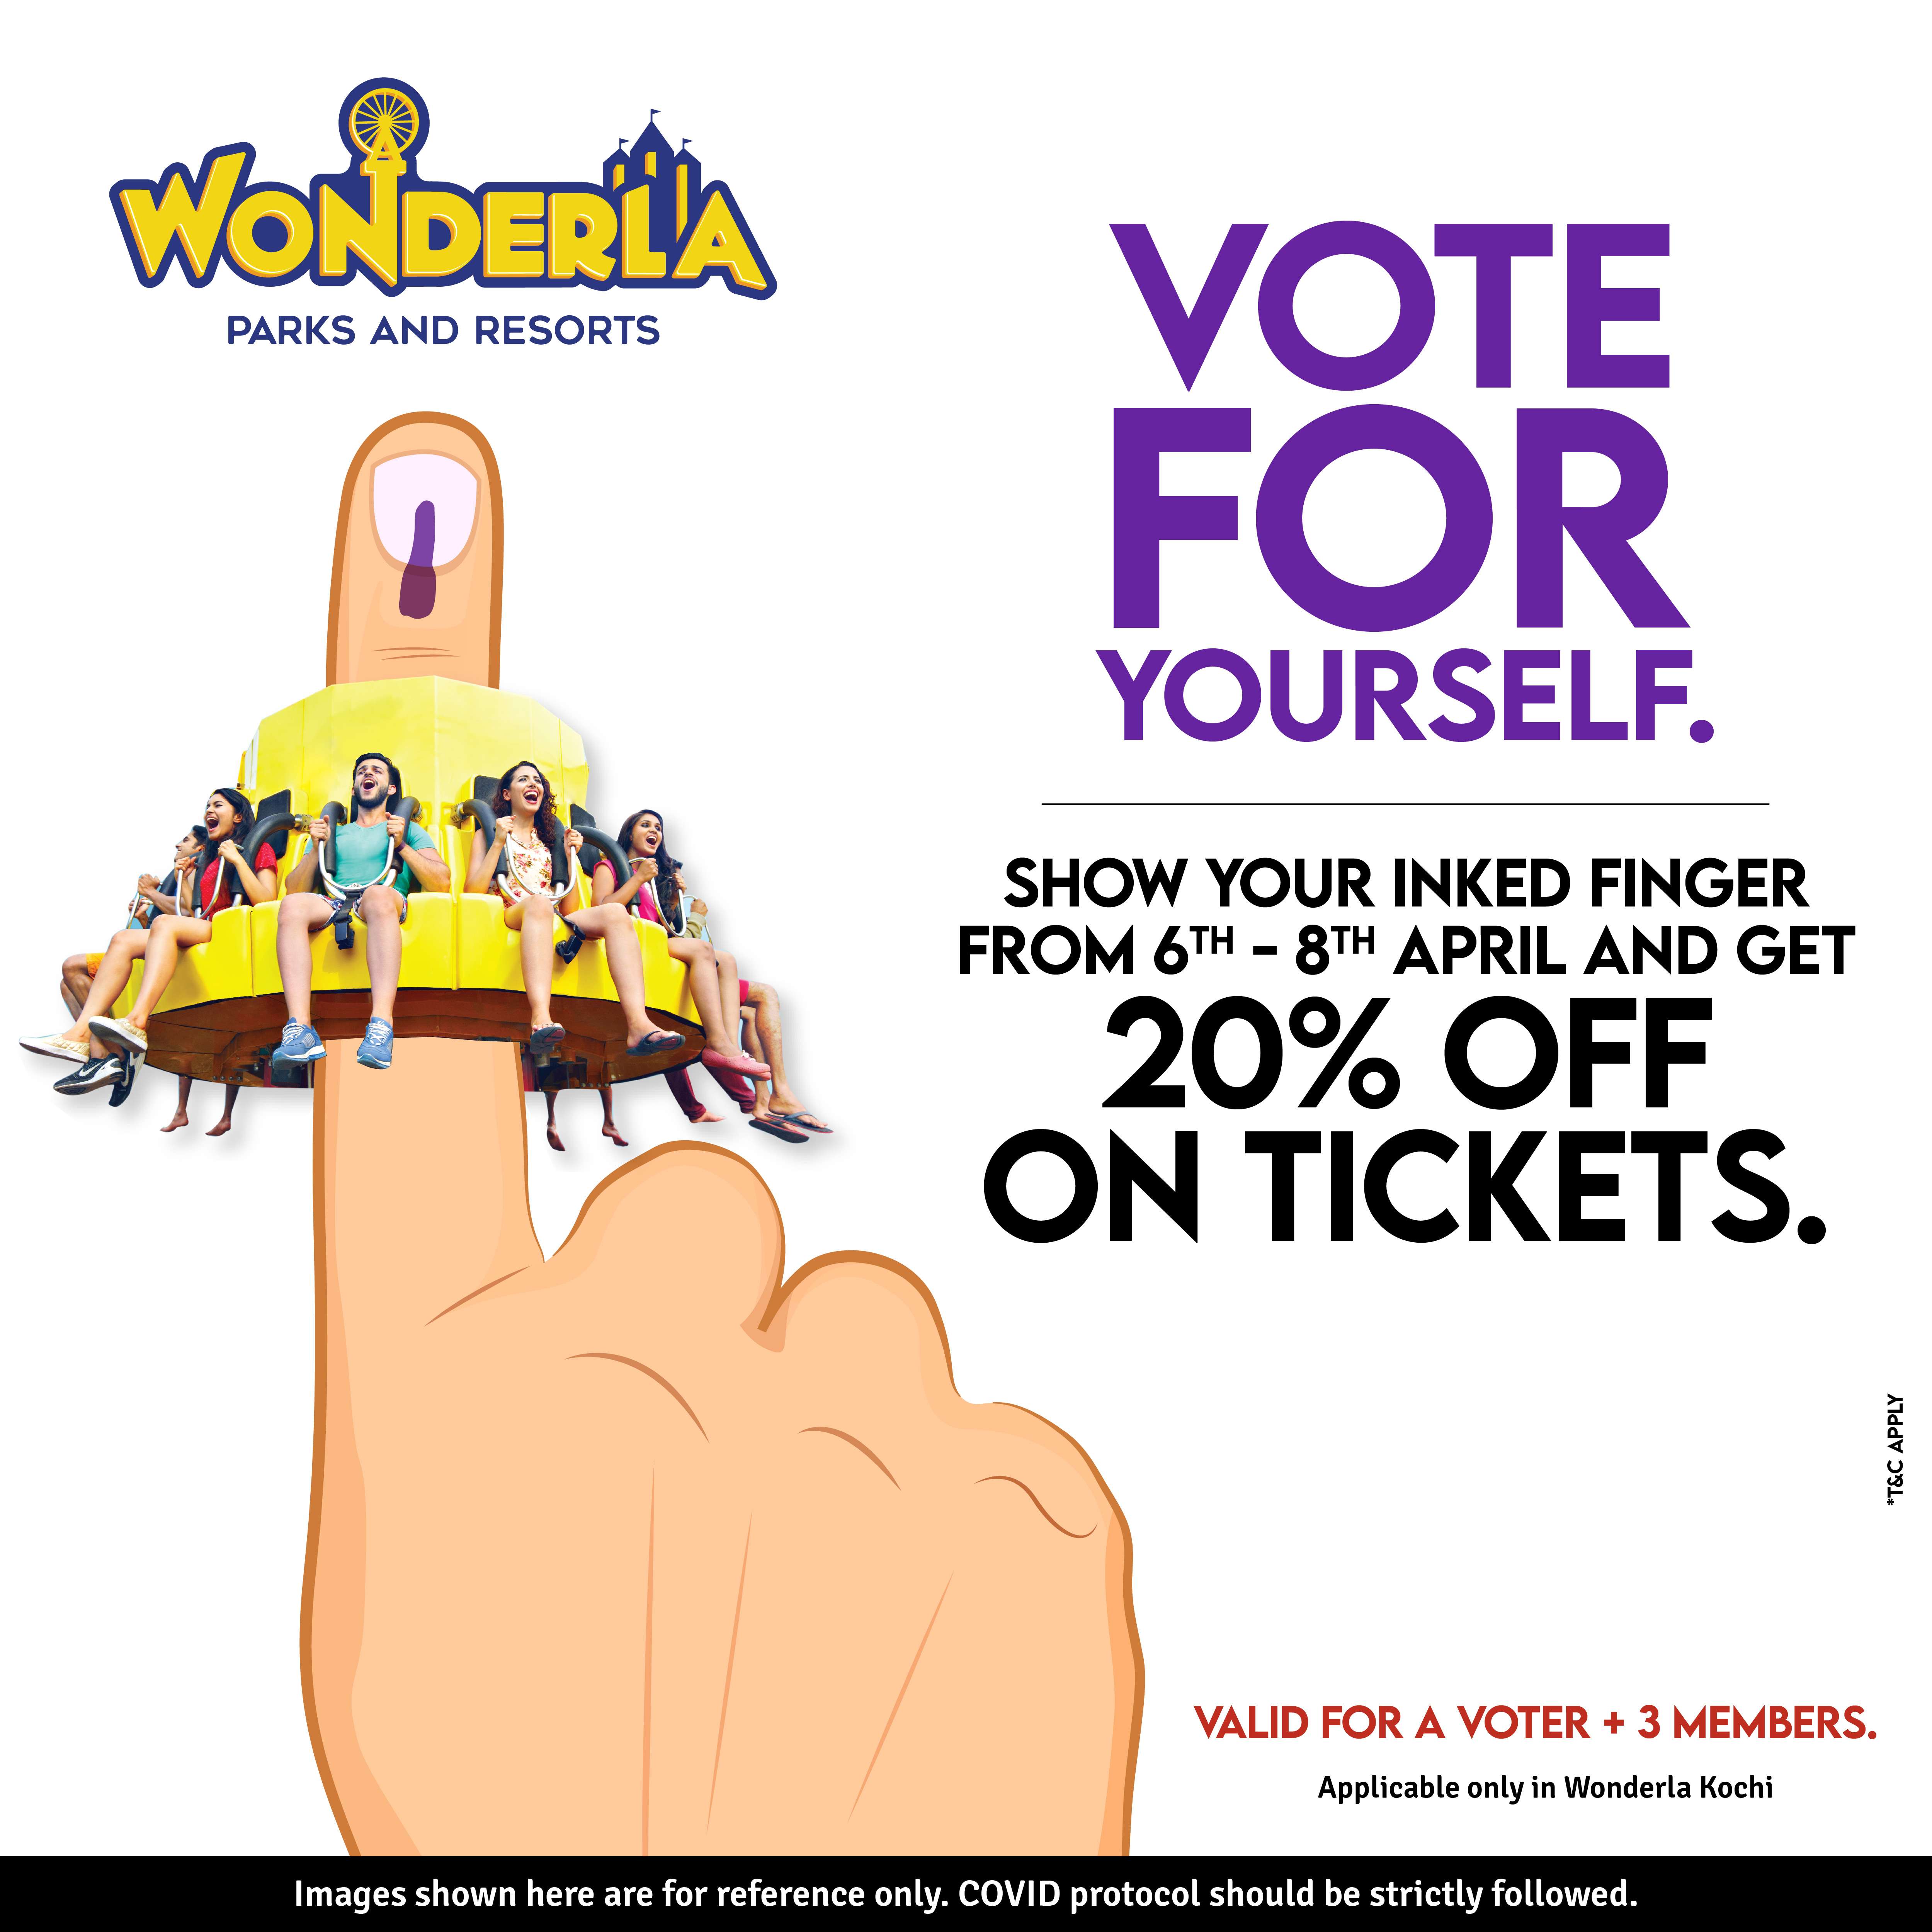 Wonderla Kochi- Show your inked finger and get an amazing 20% off on tickets from 6th to 8th April